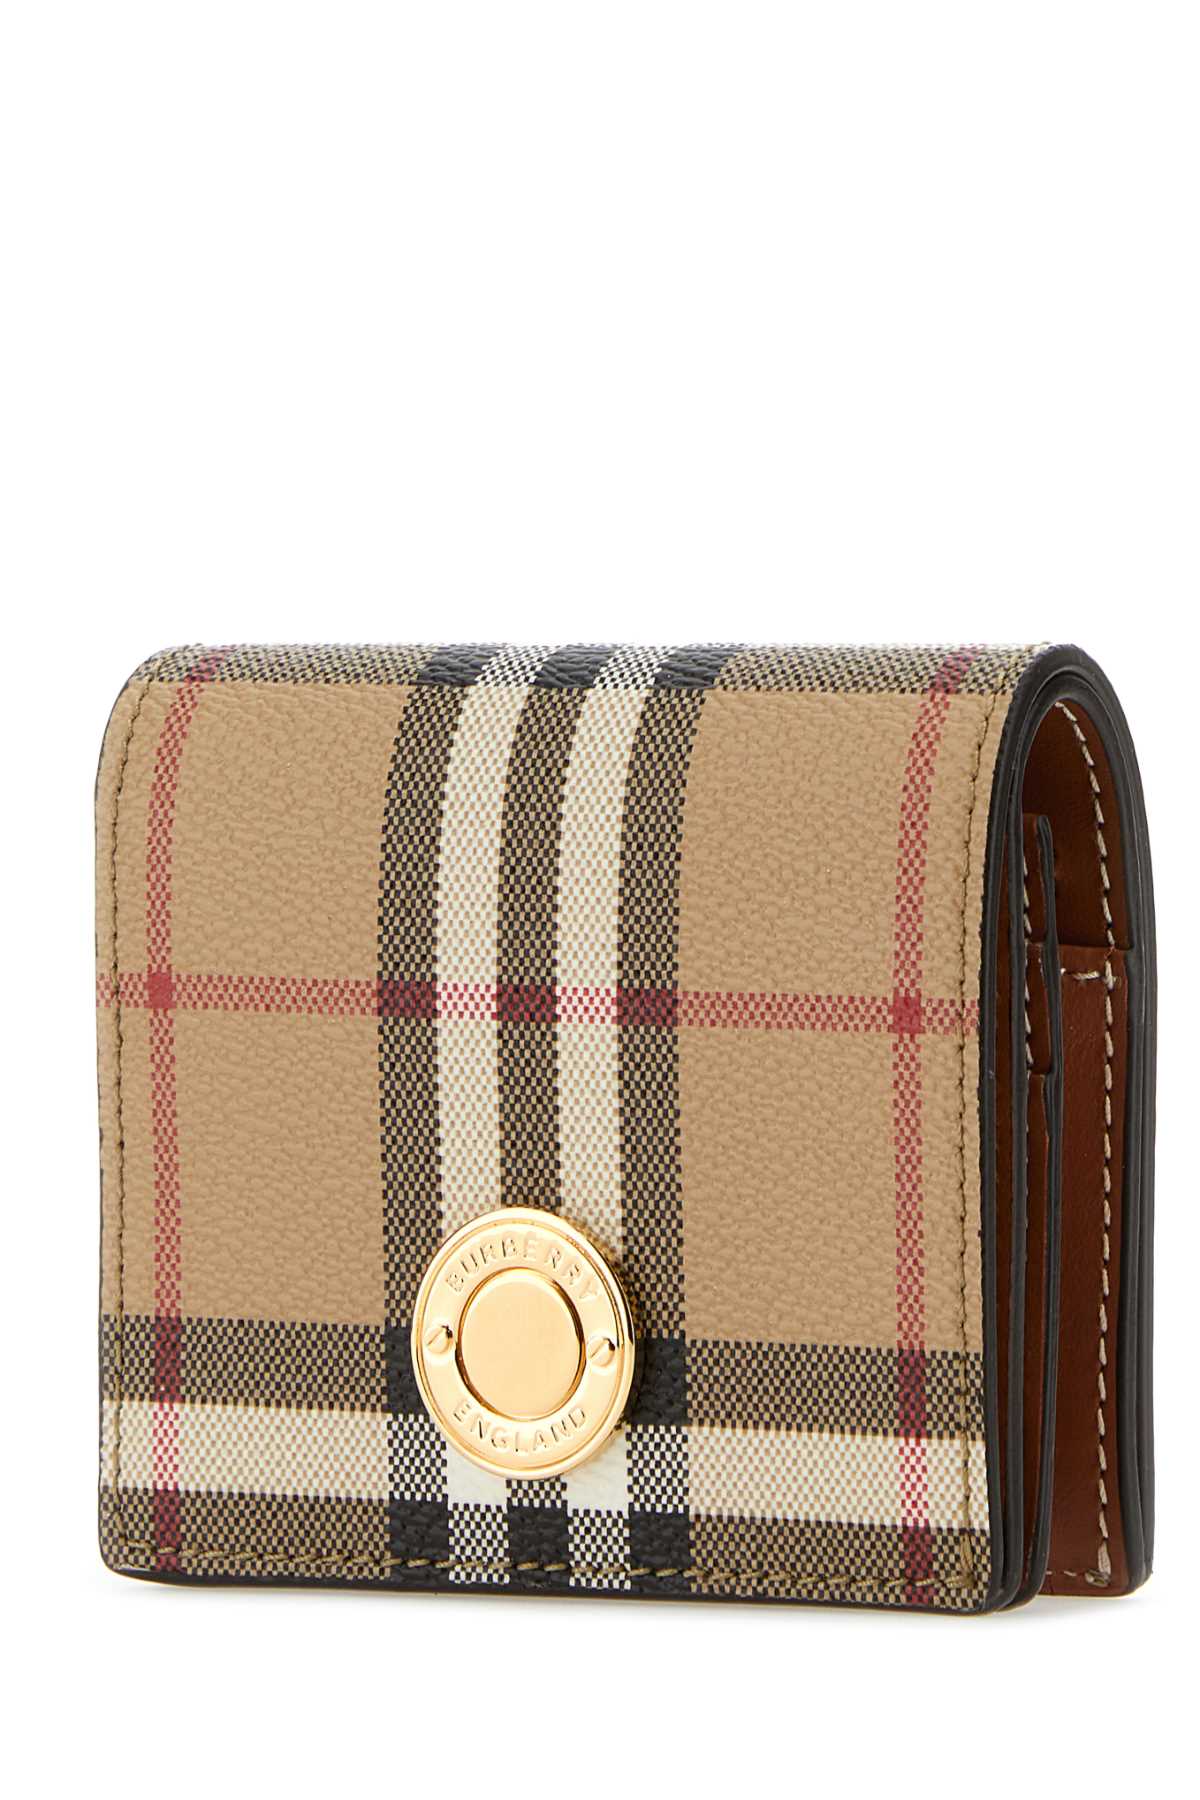 Shop Burberry Printed Canvas Small Wallet In Archivebeige